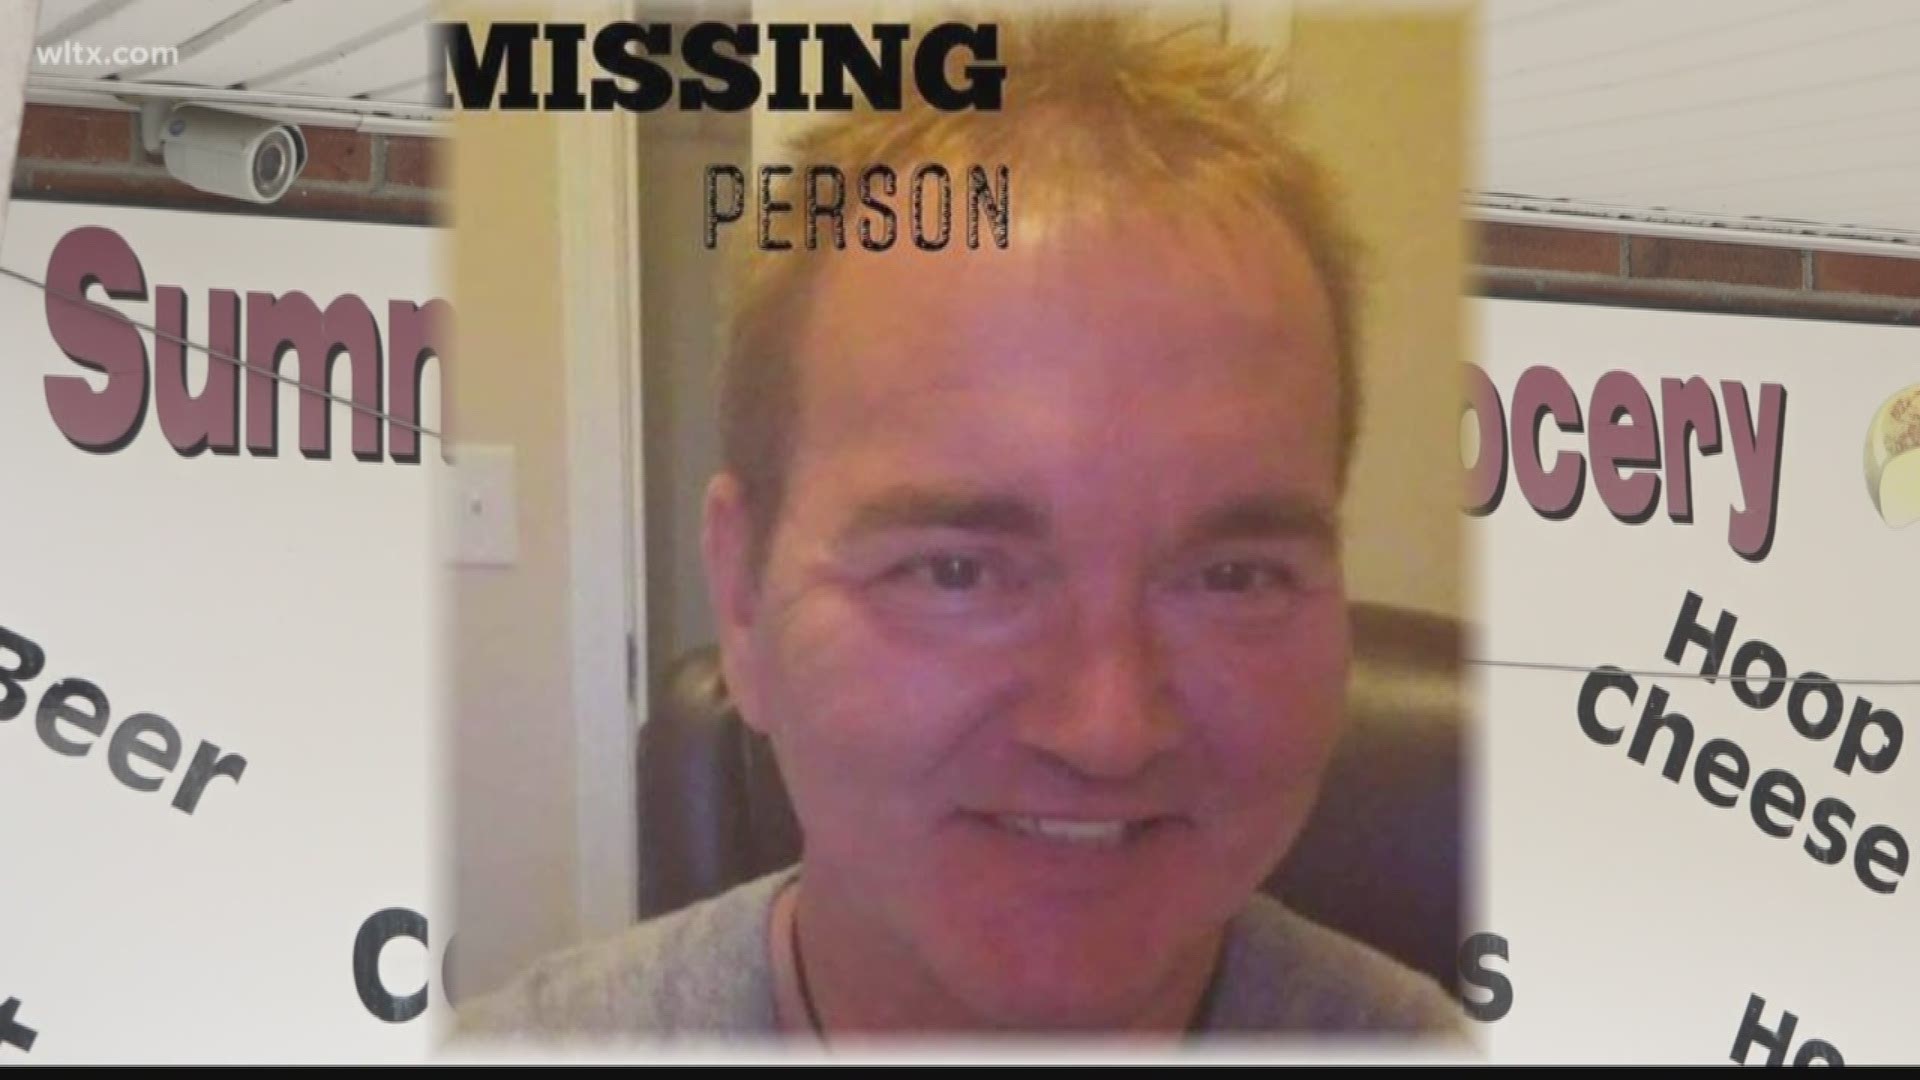 The Fairfield County Sheriff's Department is asking for help to find a man that went missing almost a month ago.